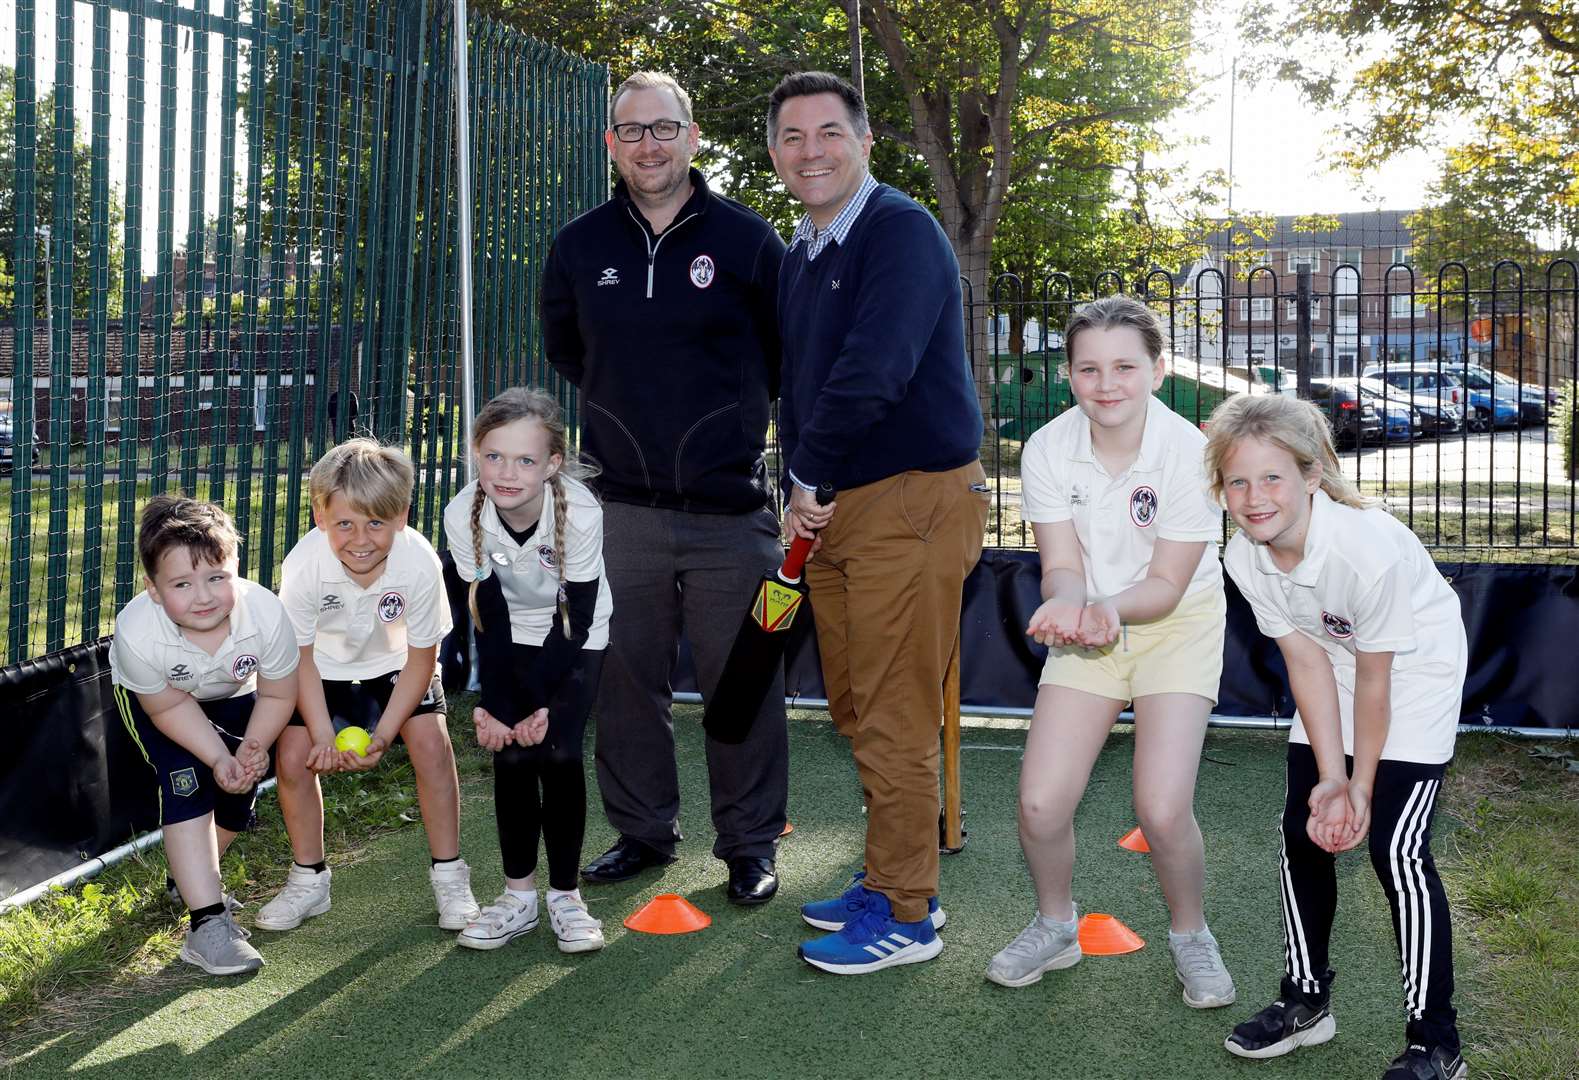 Snodland Community Cricket Club's new practice facility is now open